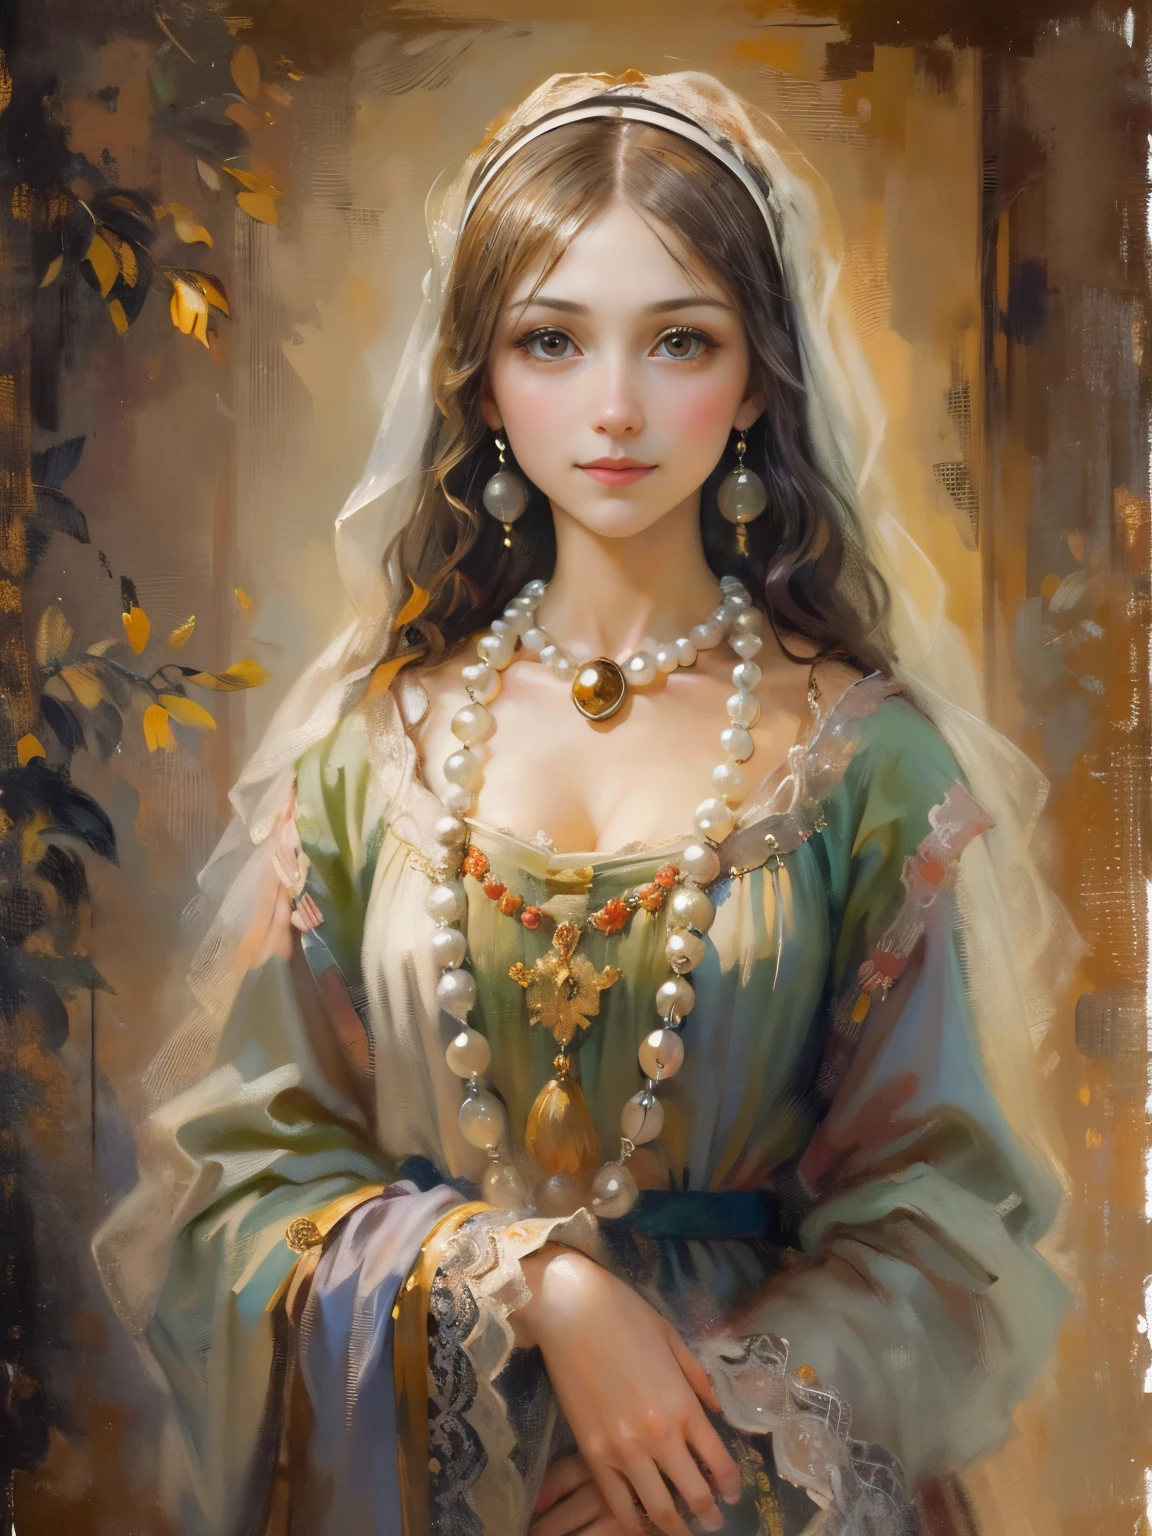 an oil painting，da vinci art style。beuaty girl，ssmile，Beautiful Medieval Costumes，pearls necklace，Artistic creativity:1.37,Oil brush strokes，Oil painting texture